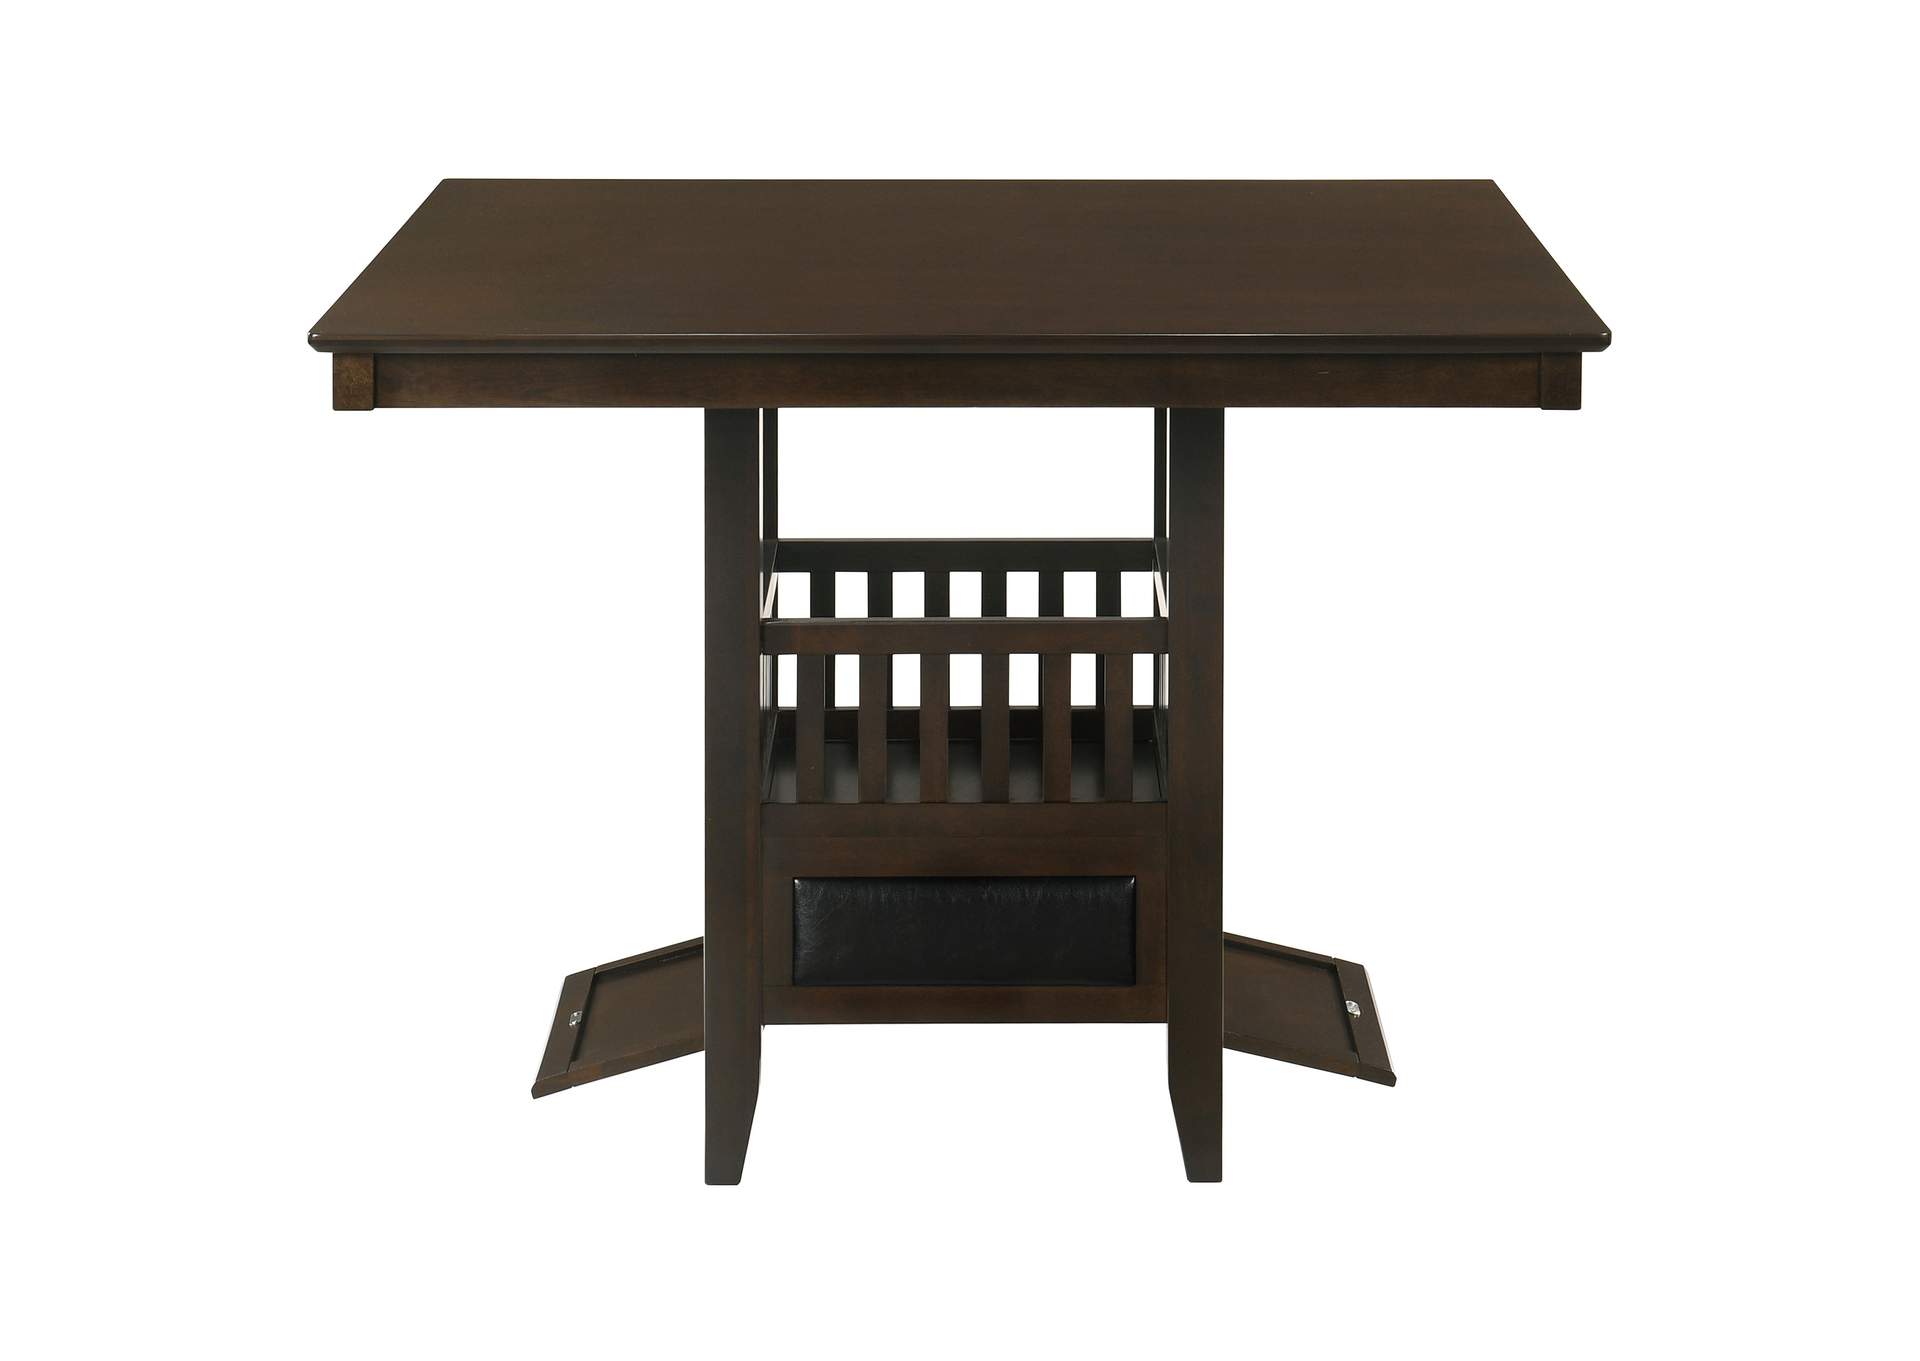 Jaden Square Counter Height Table with Storage Espresso,Coaster Furniture